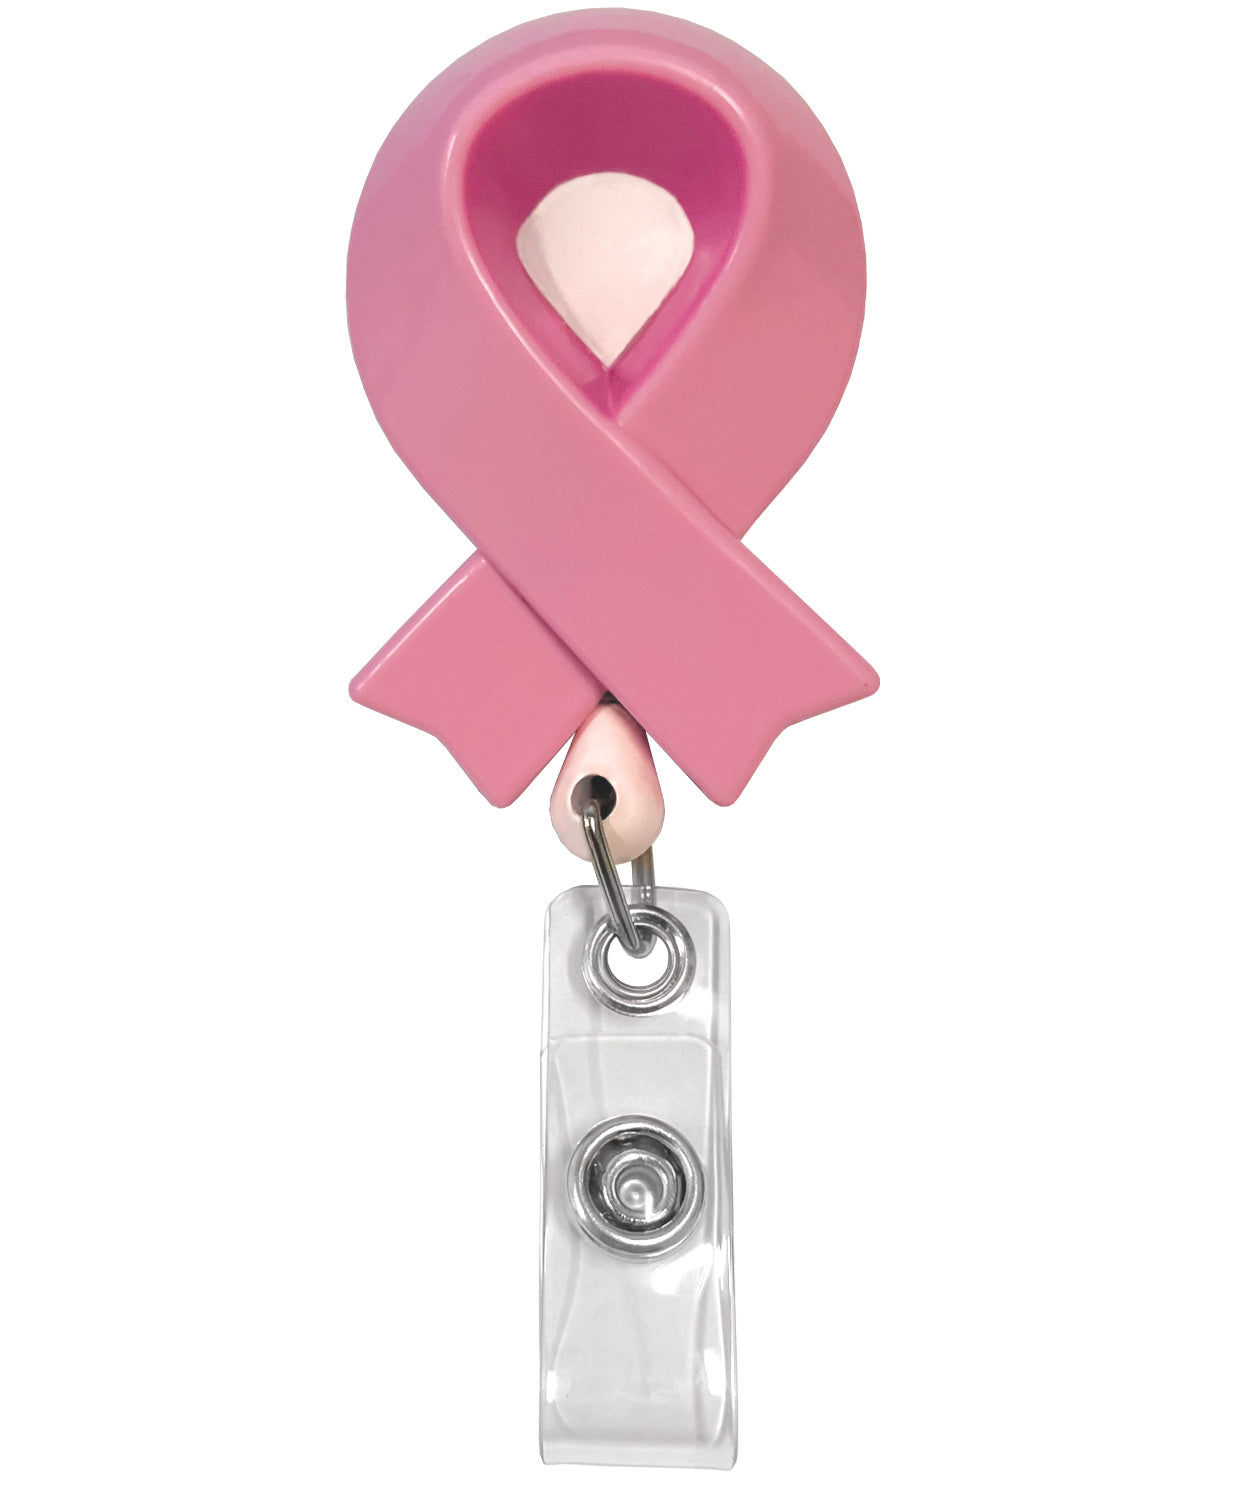 Prestige Medical Deluxe Retractable ID Holder Pink Ribbon